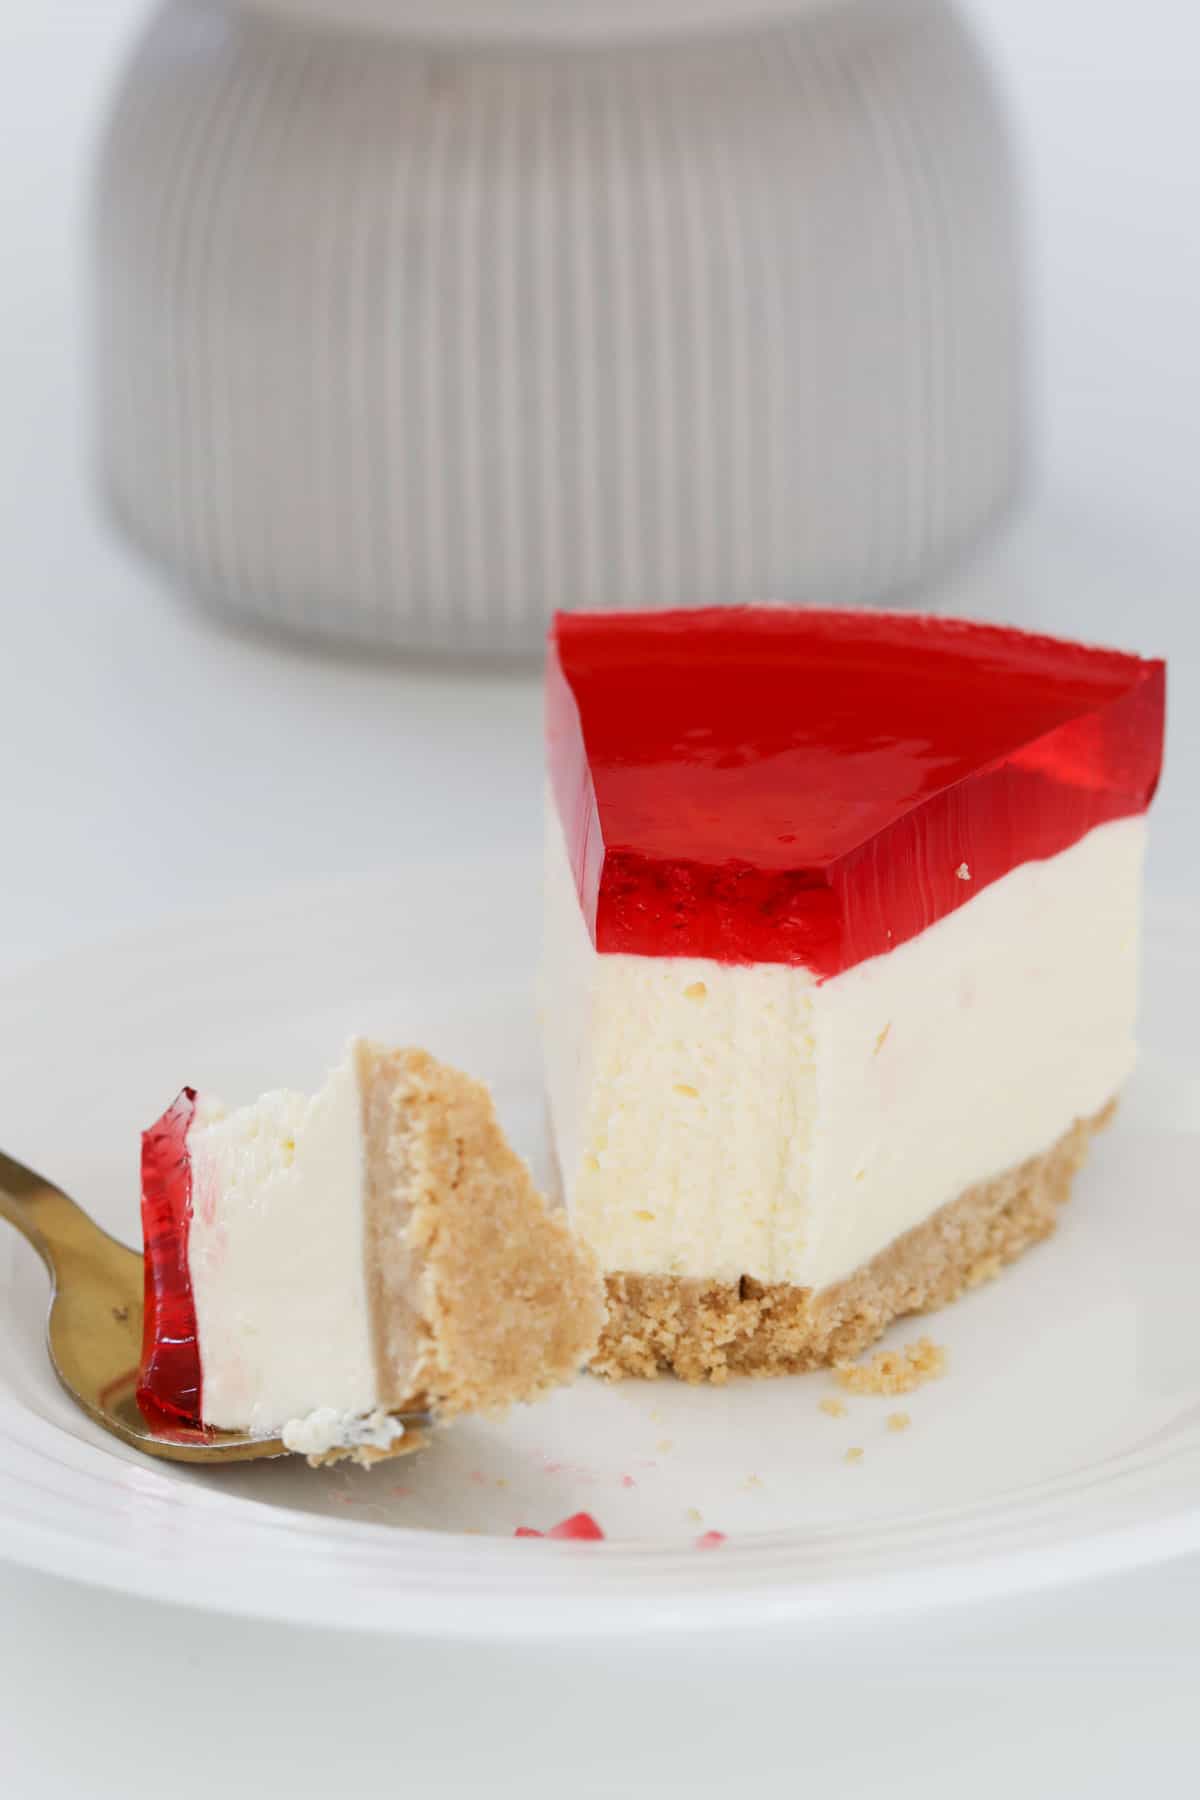 A slice of cheesecake on a plate being eaten with a fork.